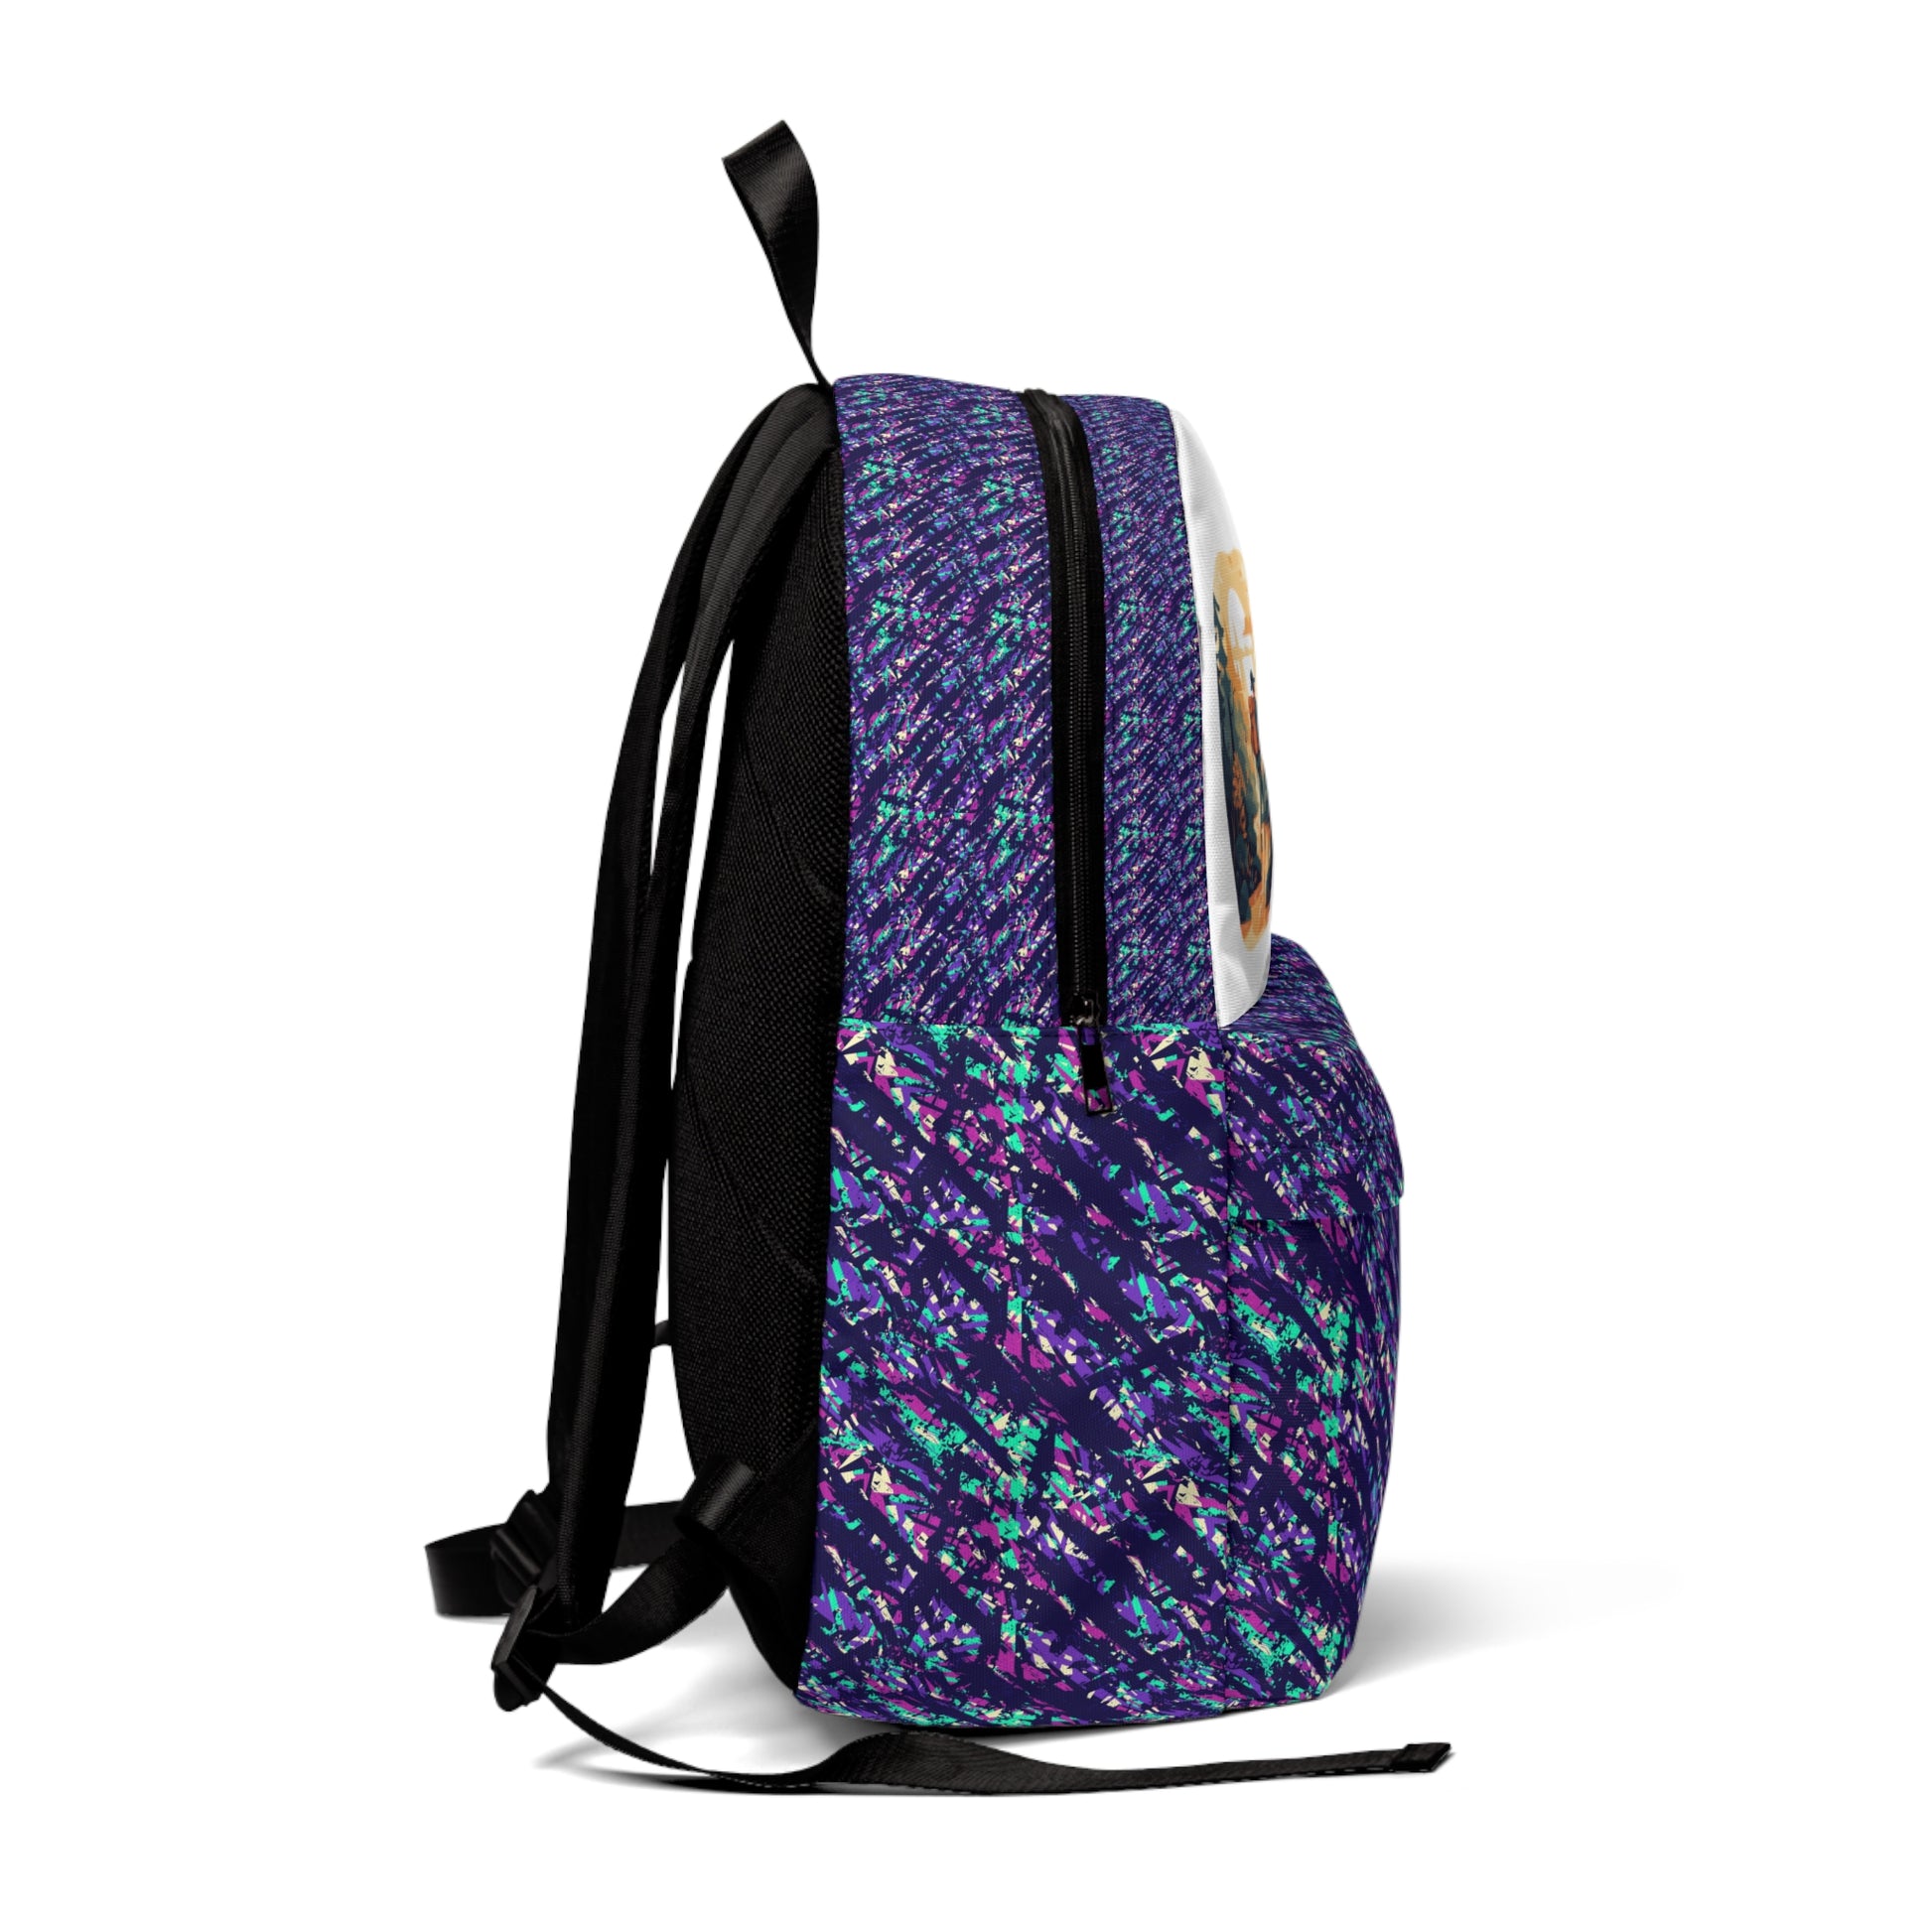 Niccie's Ultimate Unisex Classic Backpack, Elevate Your Style